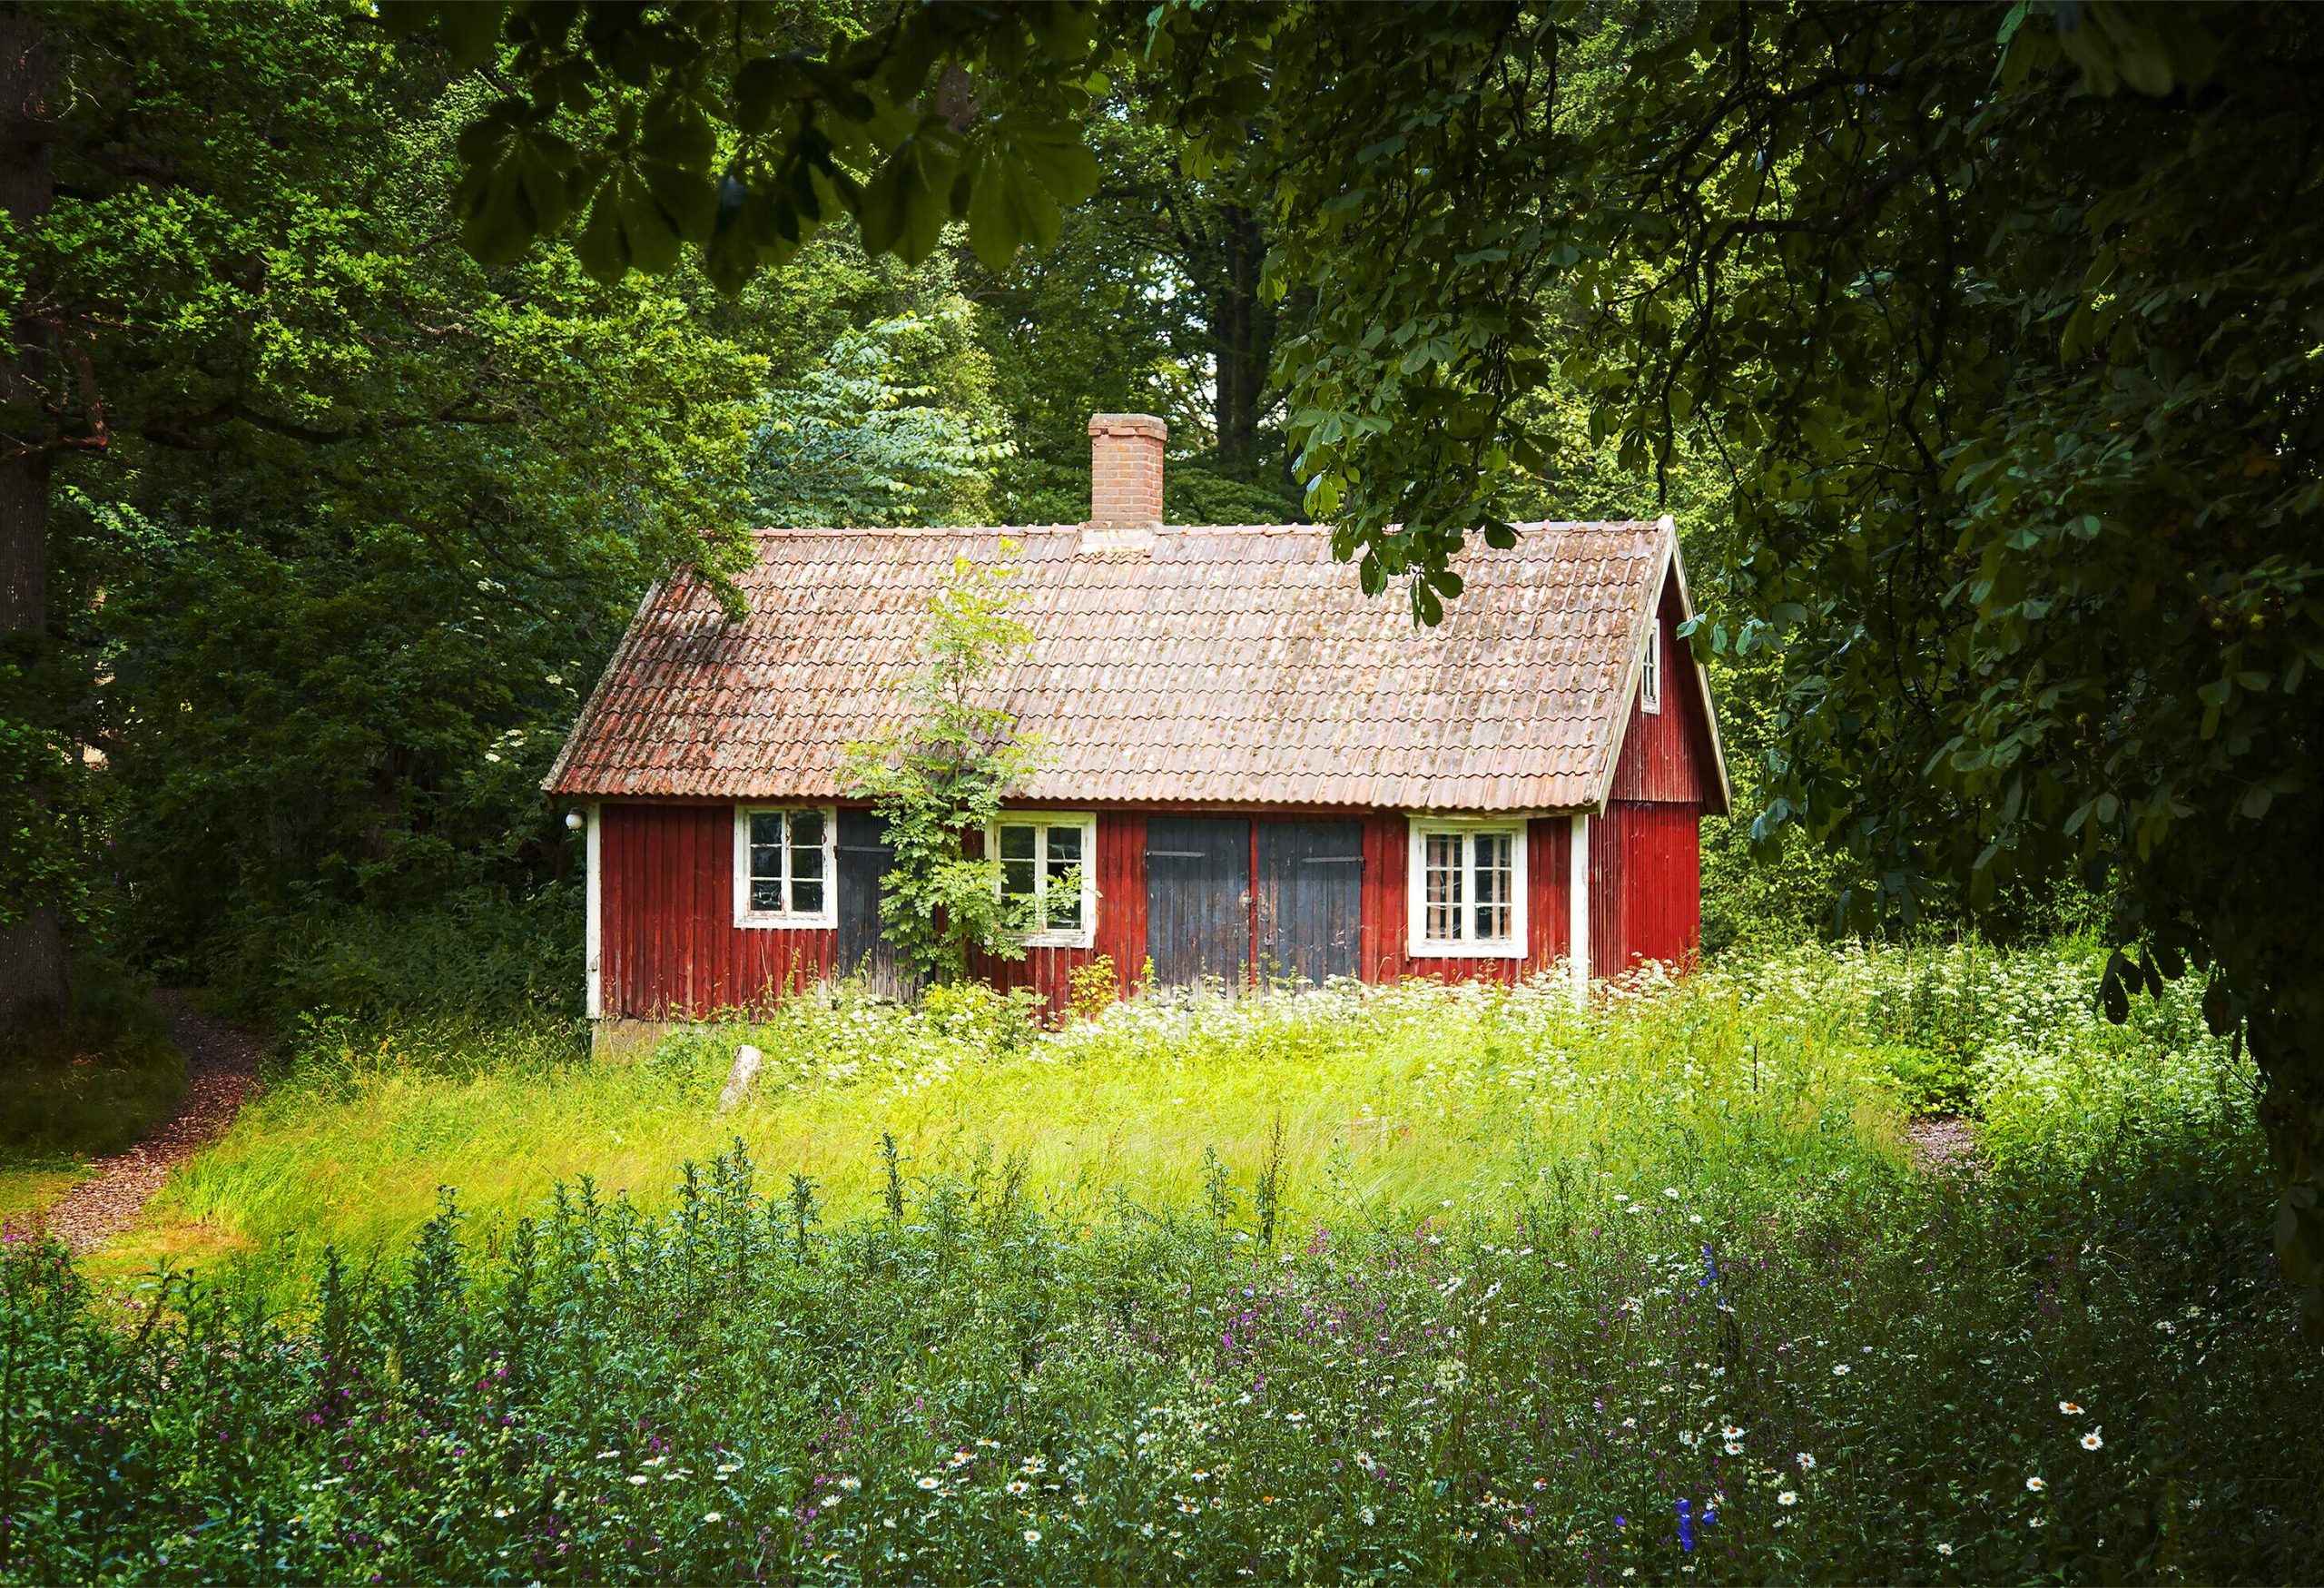 A red cabin with gable roof set in the middle of a forest.